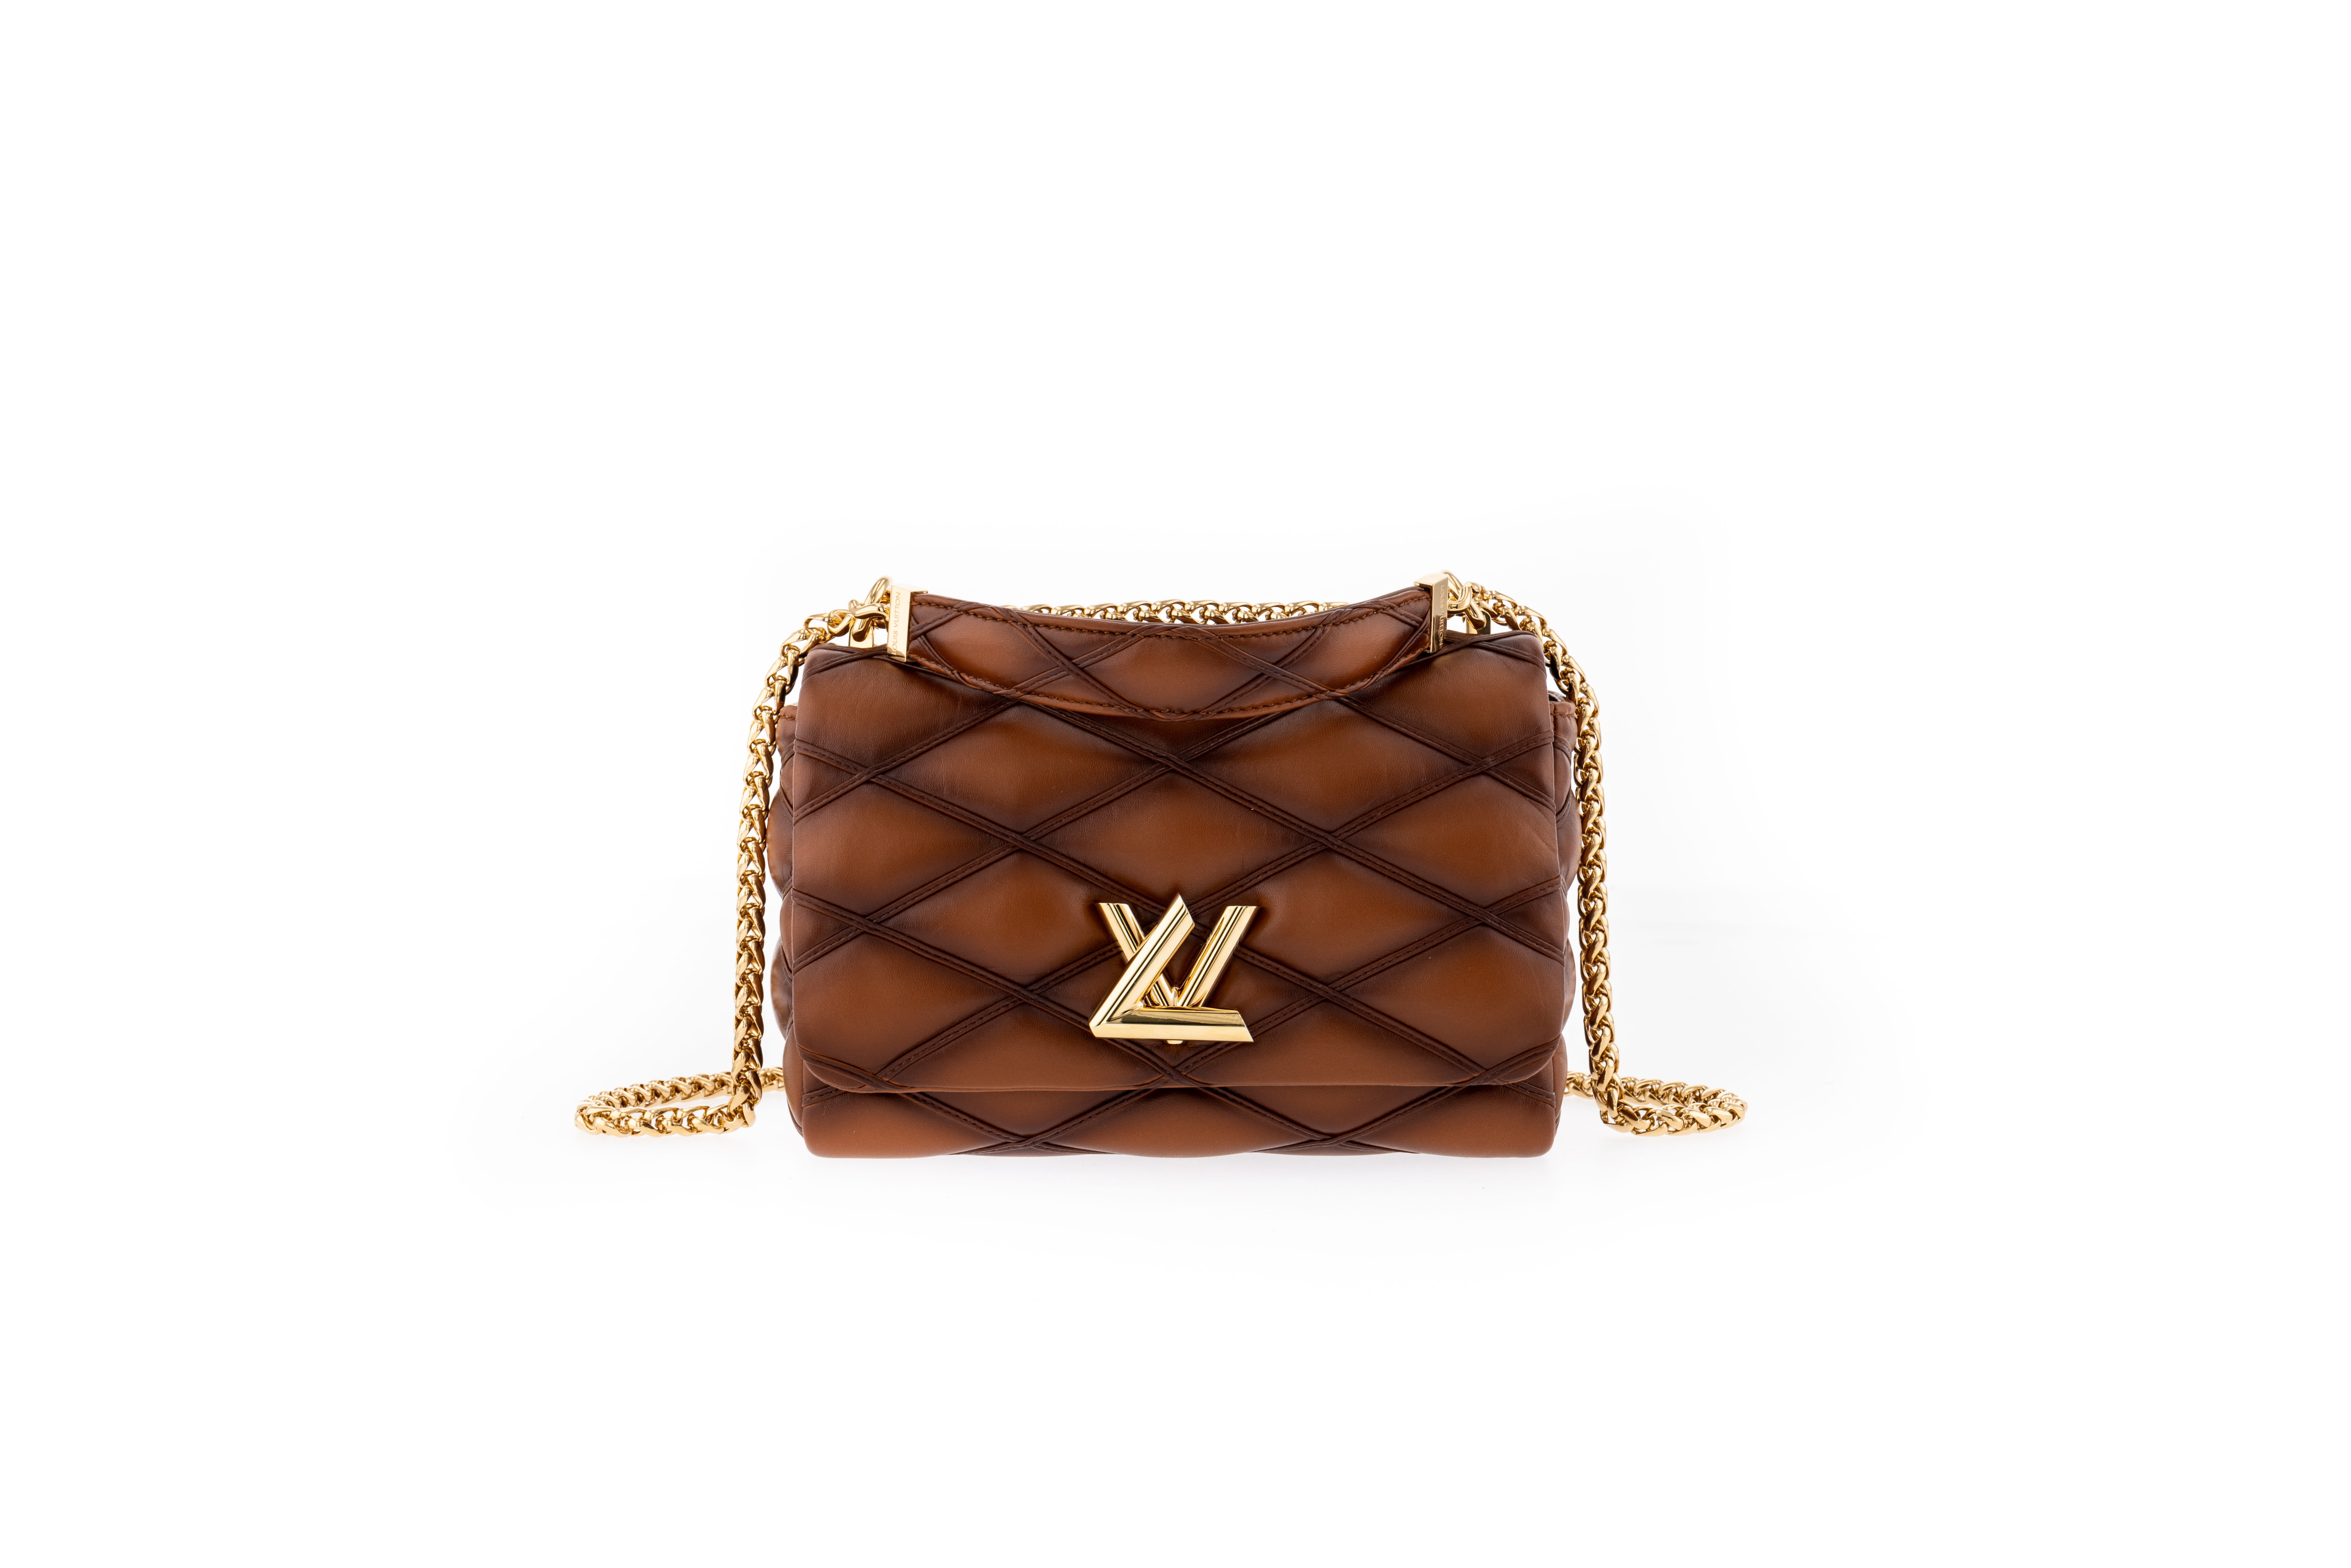 Louis Vuitton Debuted A New Take On Its losic Logo Handbag For